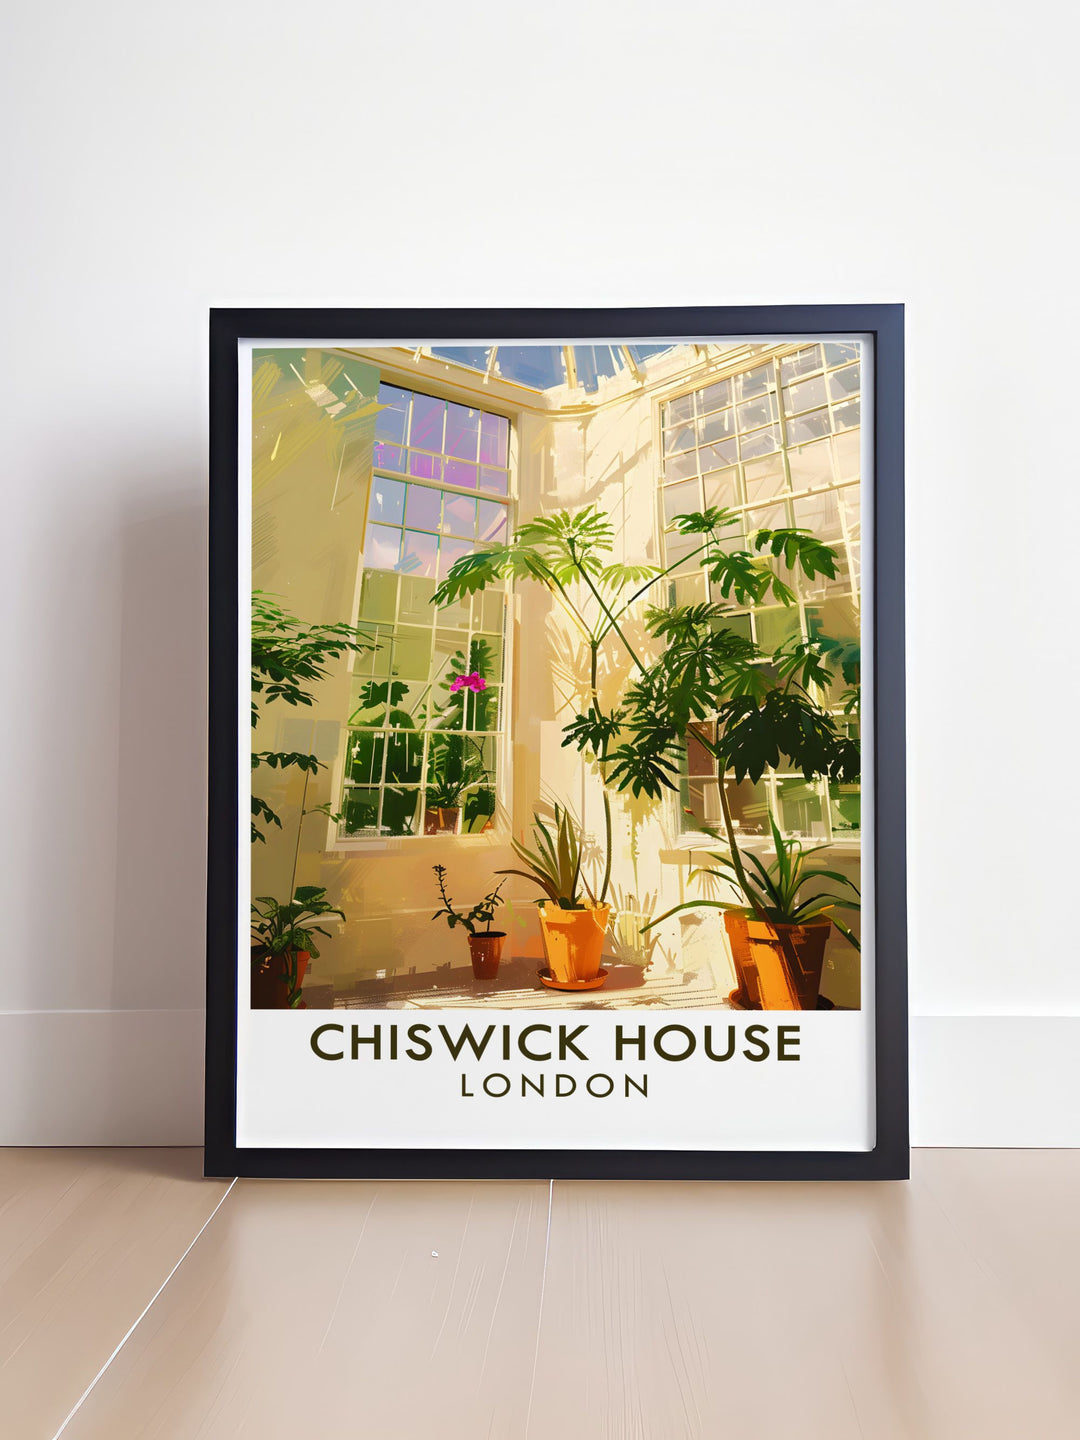 Admire the neoclassical architecture of Chiswick House in London, featuring its grand dome and ornate interiors, a perfect blend of elegance and historical significance.